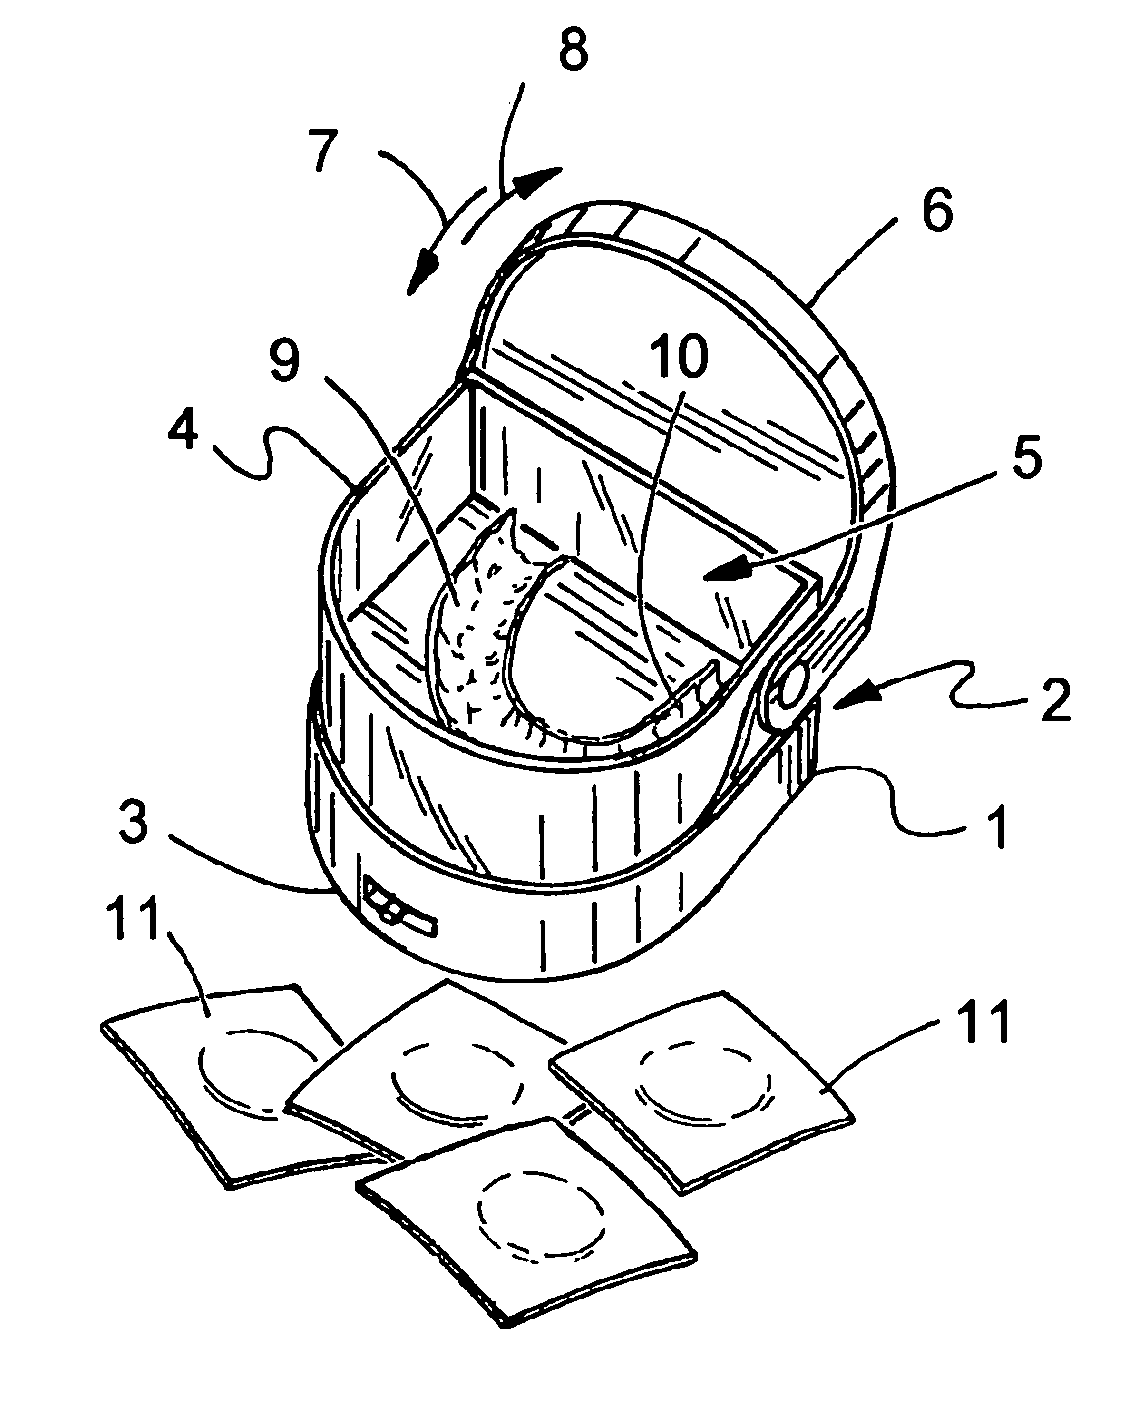 System for cleaning dental and/or medical appliances and implements utilizing a sonic wave bath